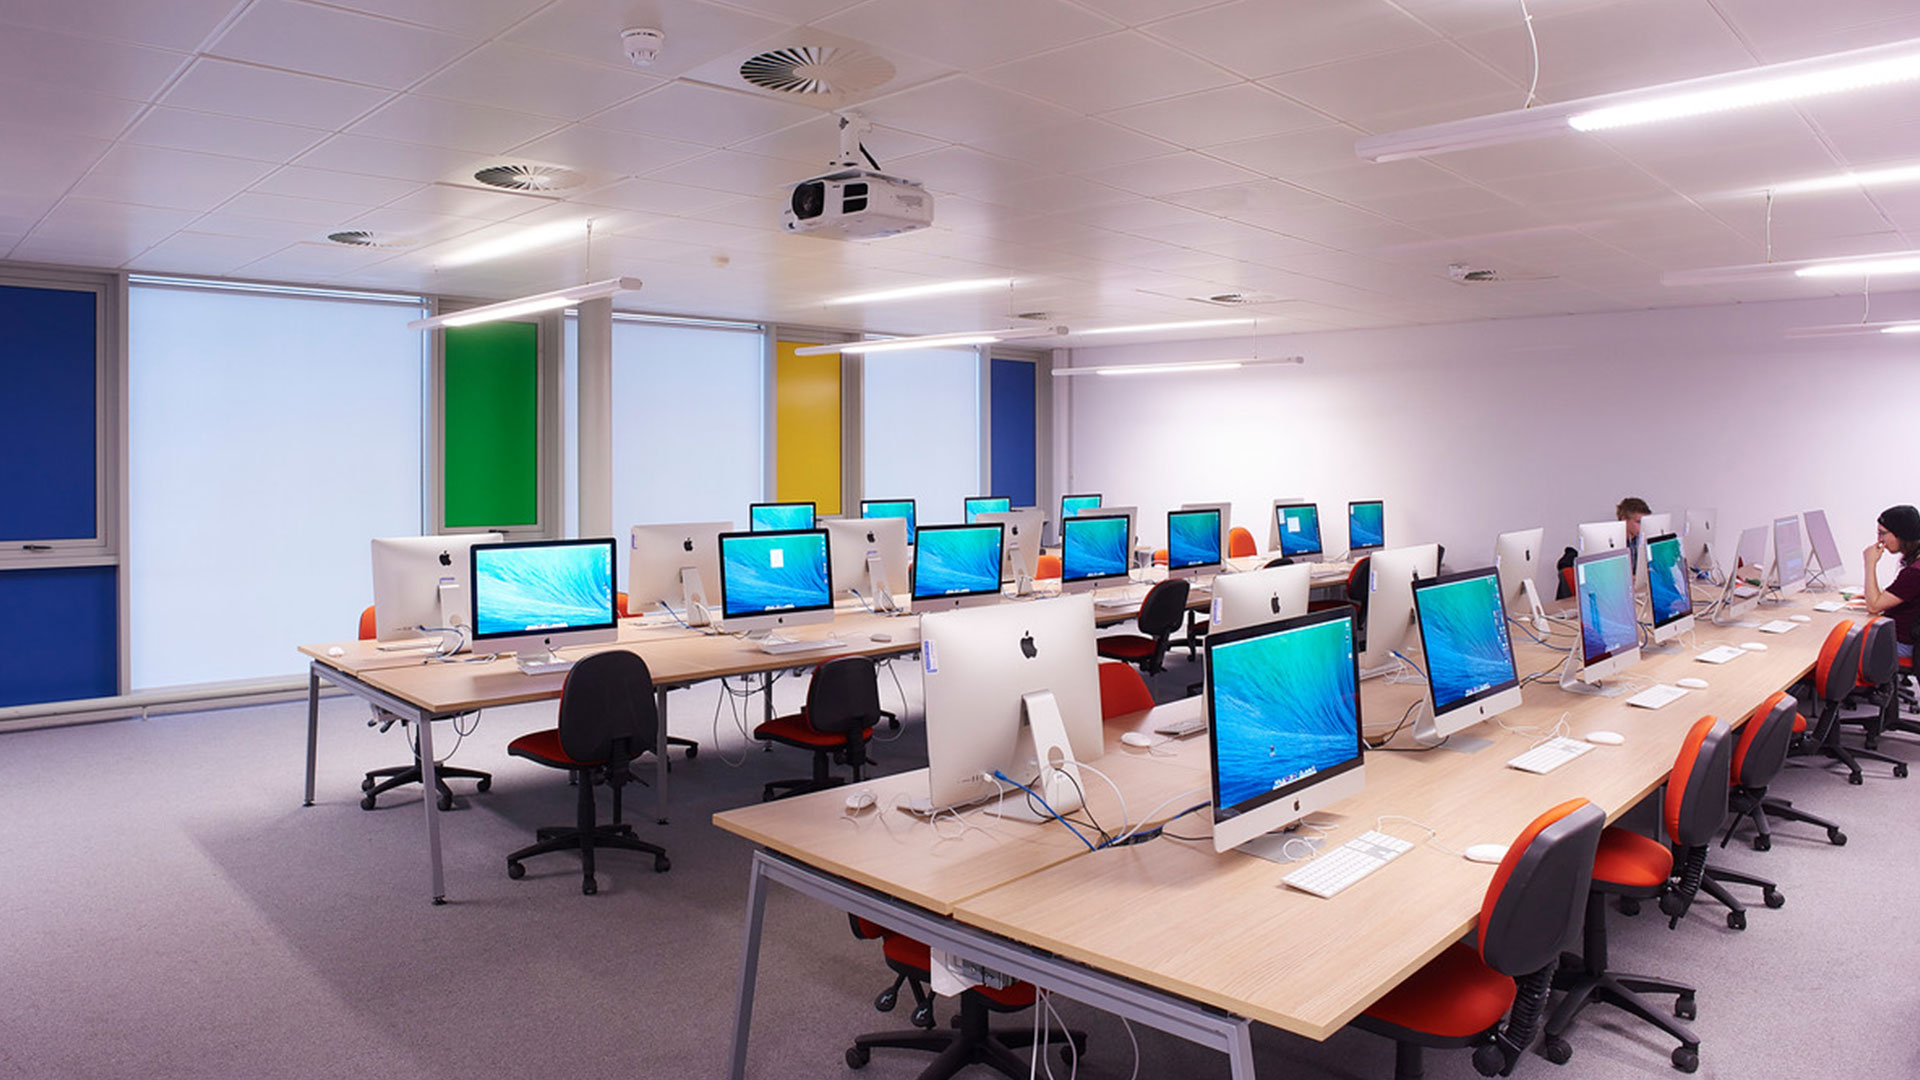 Creative Edge computer suite. There are two rows of desks all fitted with Macbook desktops